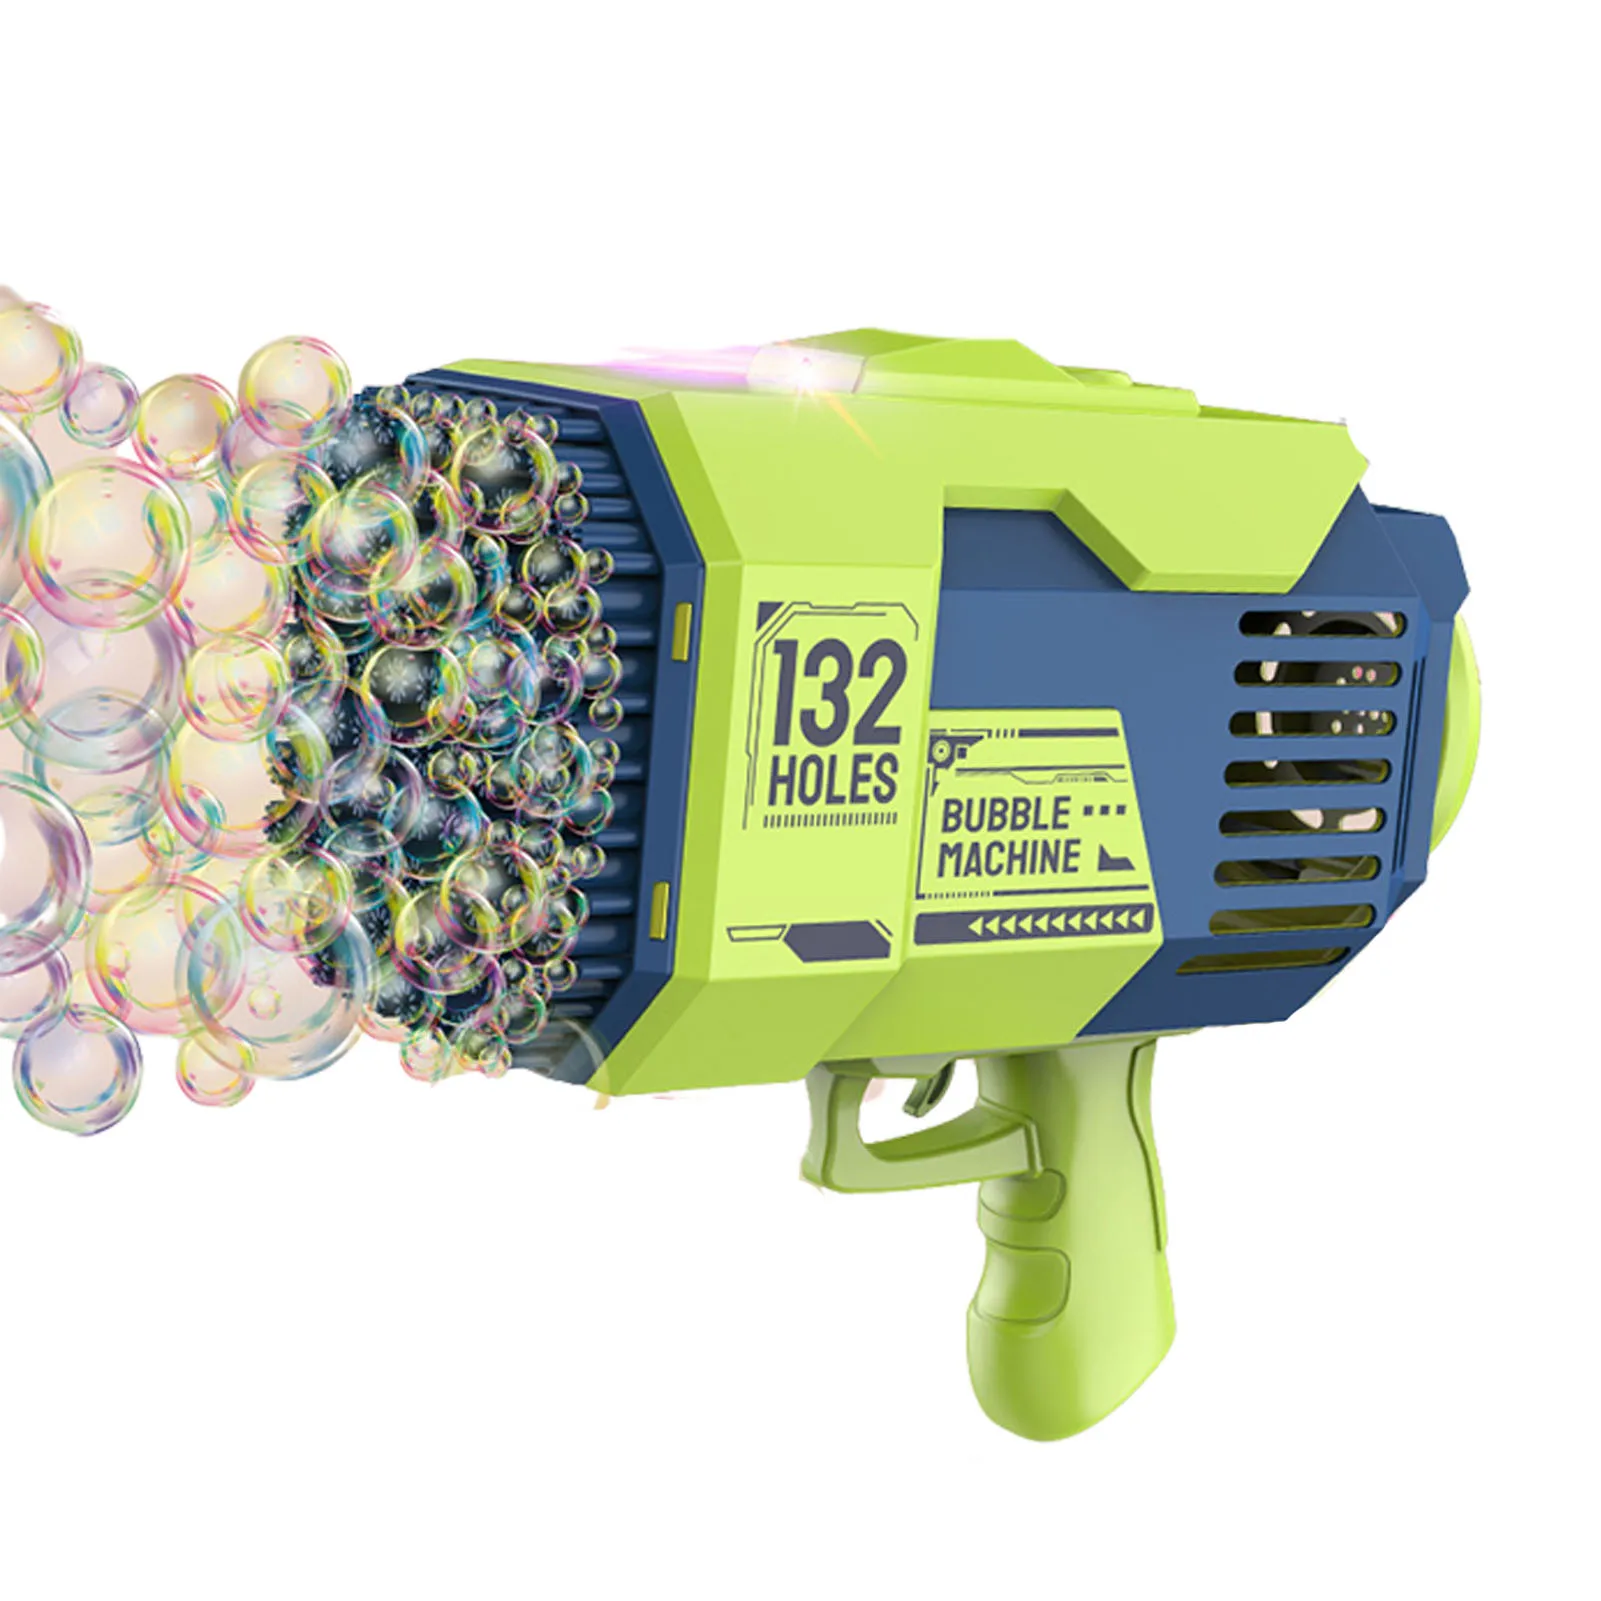 

Rocket Boom Bubble Blower Automatic Bubble Machine for Kids 132 Hole Rocket Launcher Bubble Maker with Colorful Lights Toys for